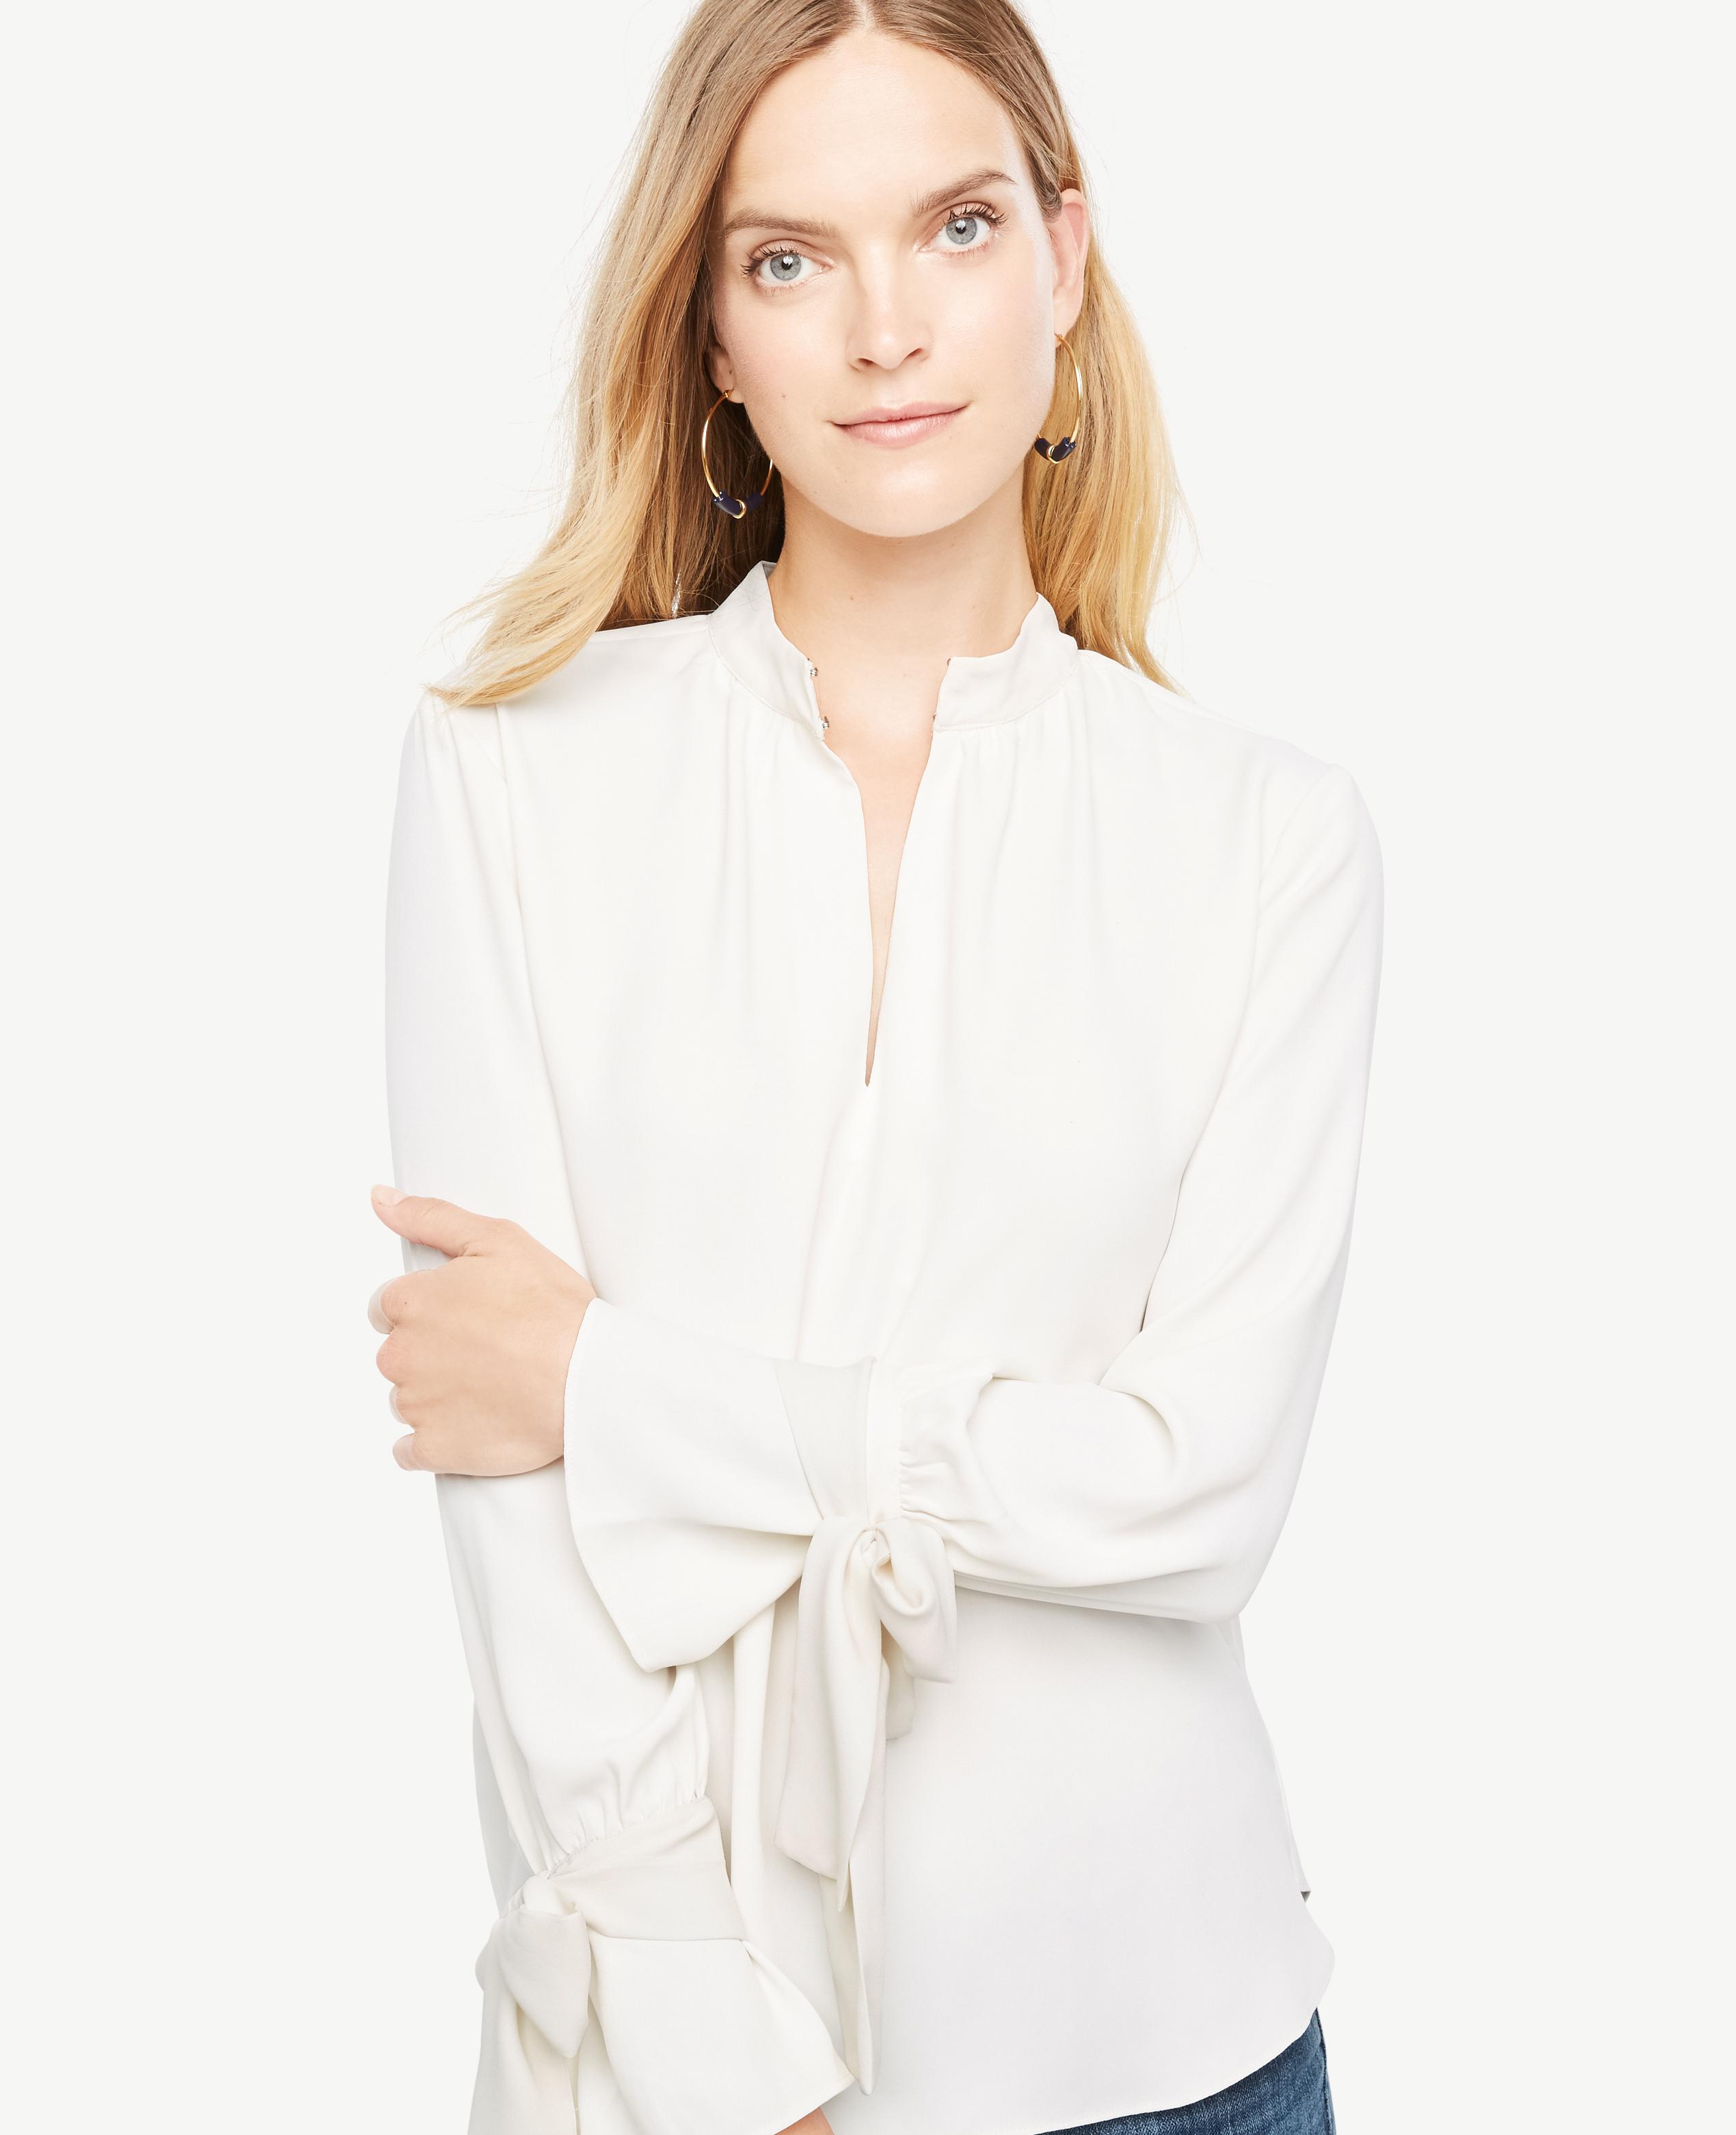 Lyst - Ann Taylor Petite Bow Cuff Blouse in White